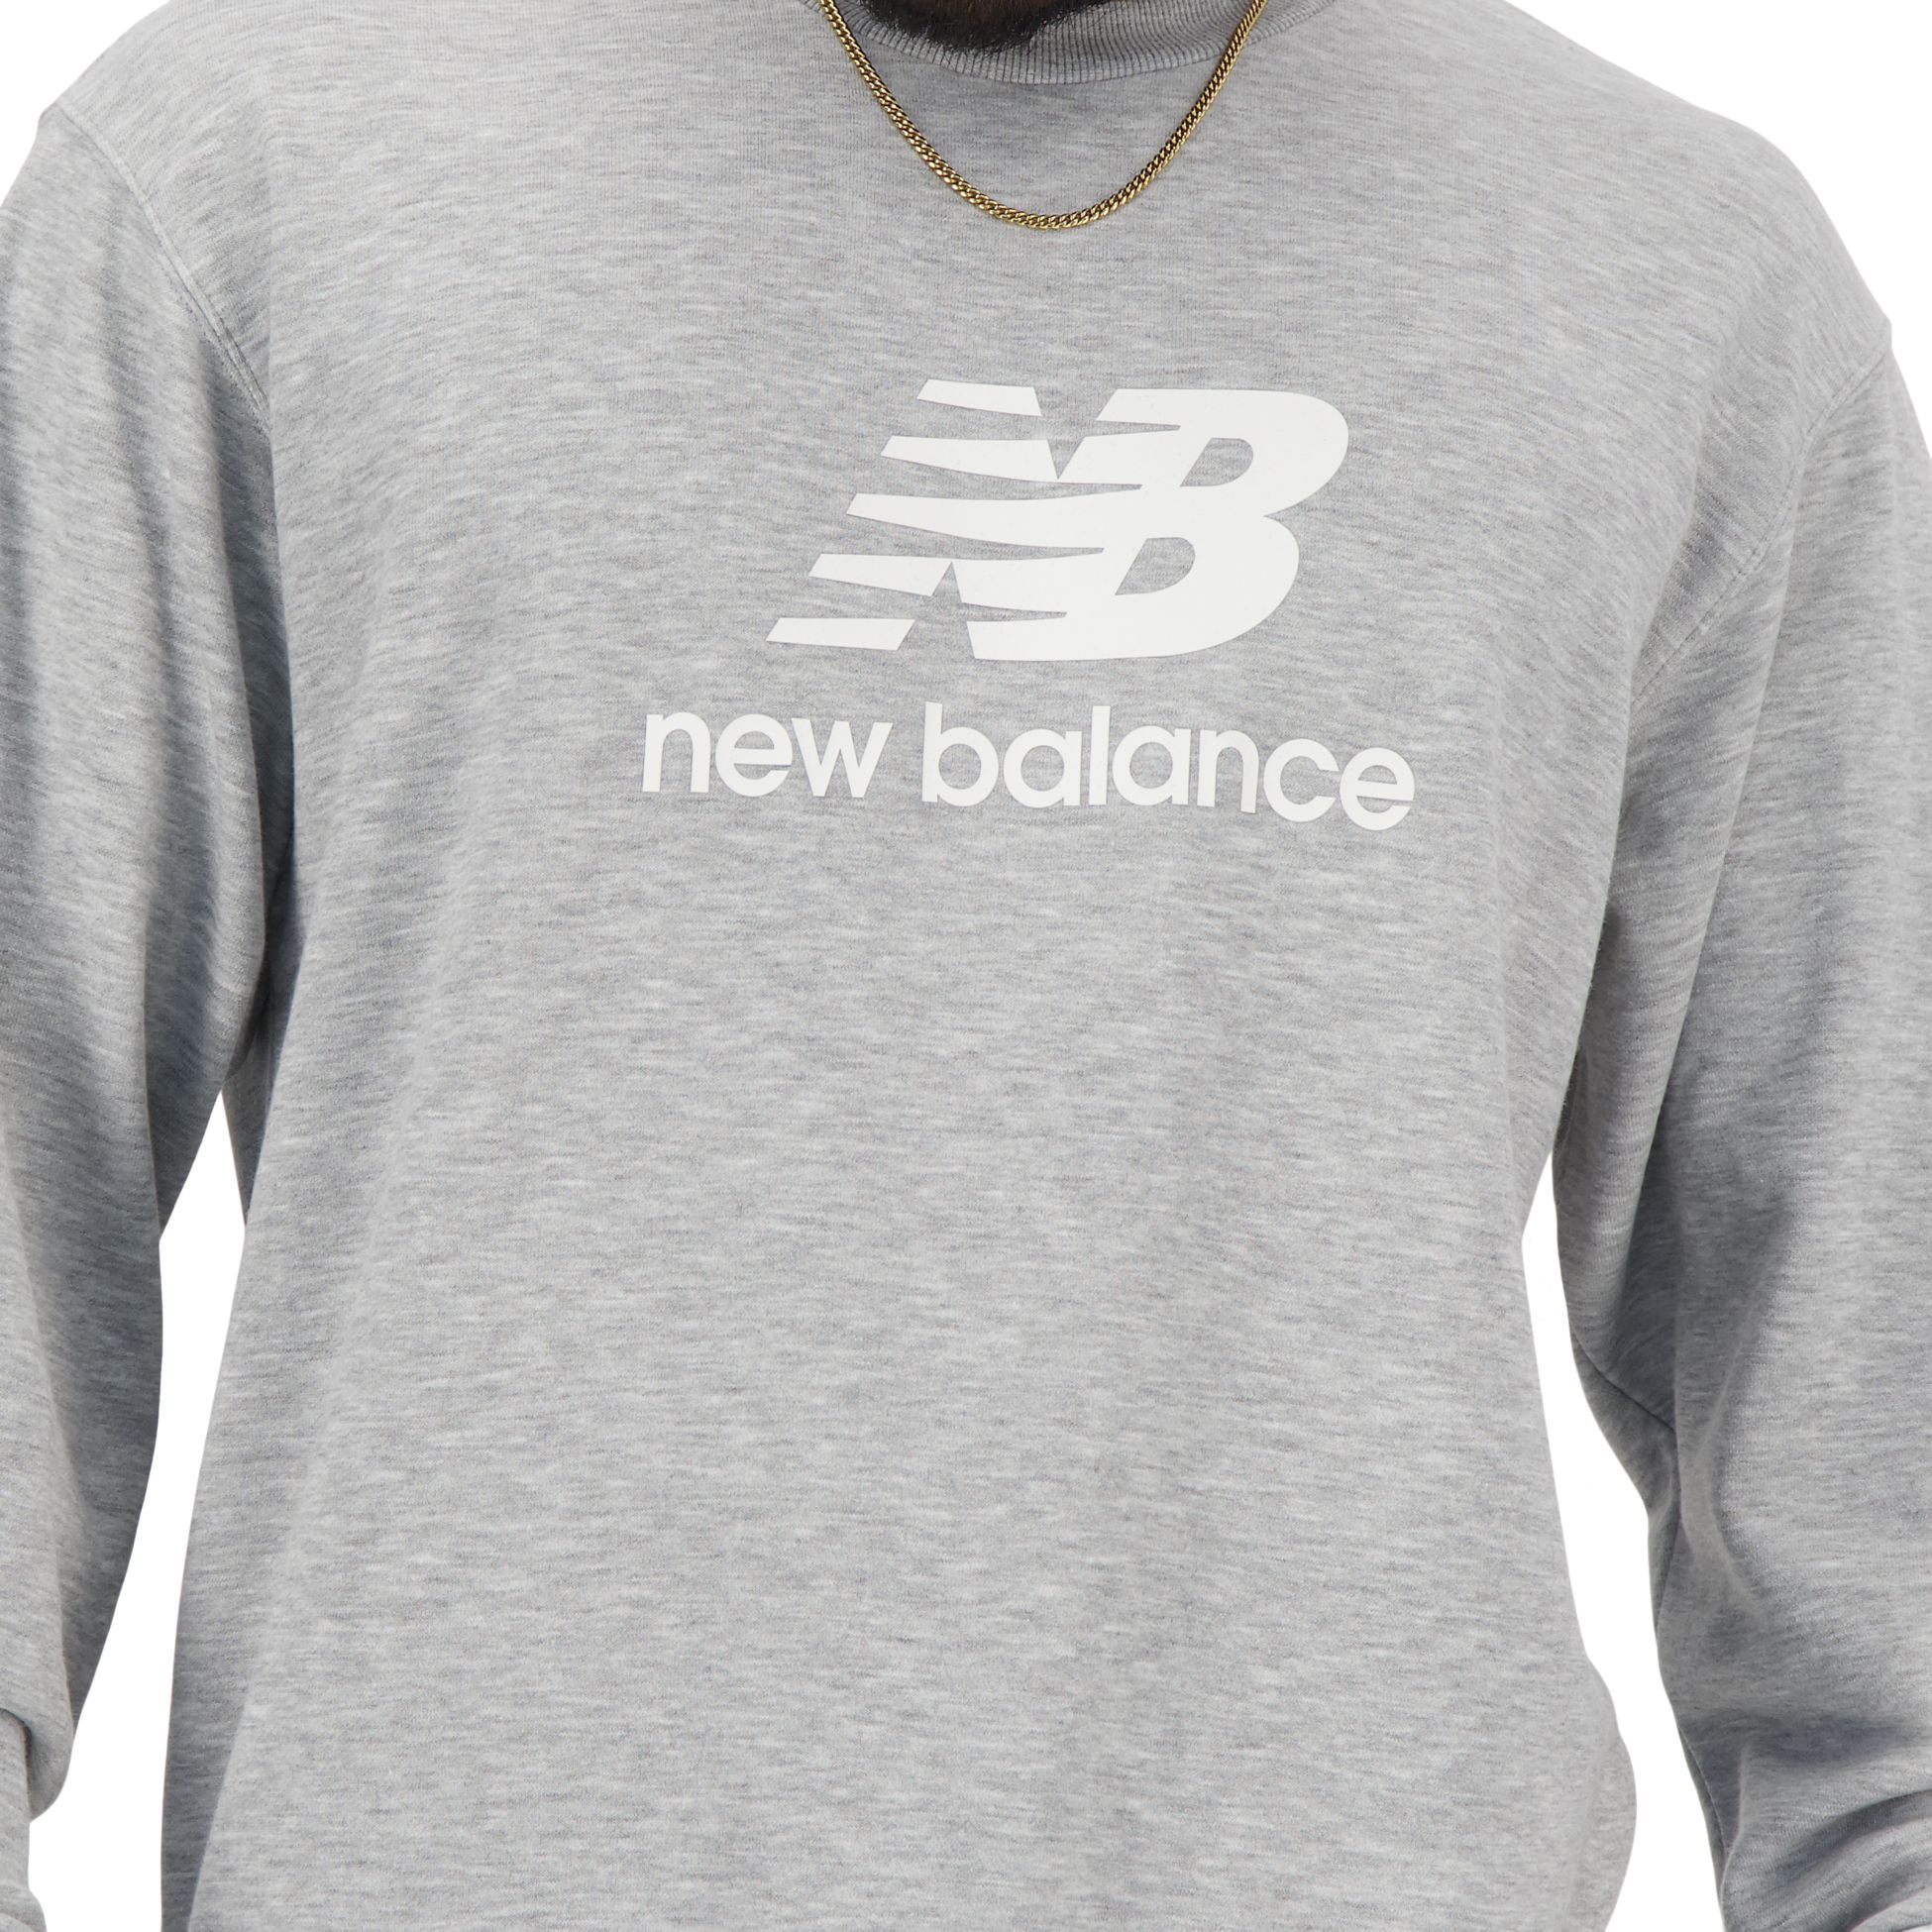 NEW BALANCE, STACKED LOGO FRENCH TERRY CREW